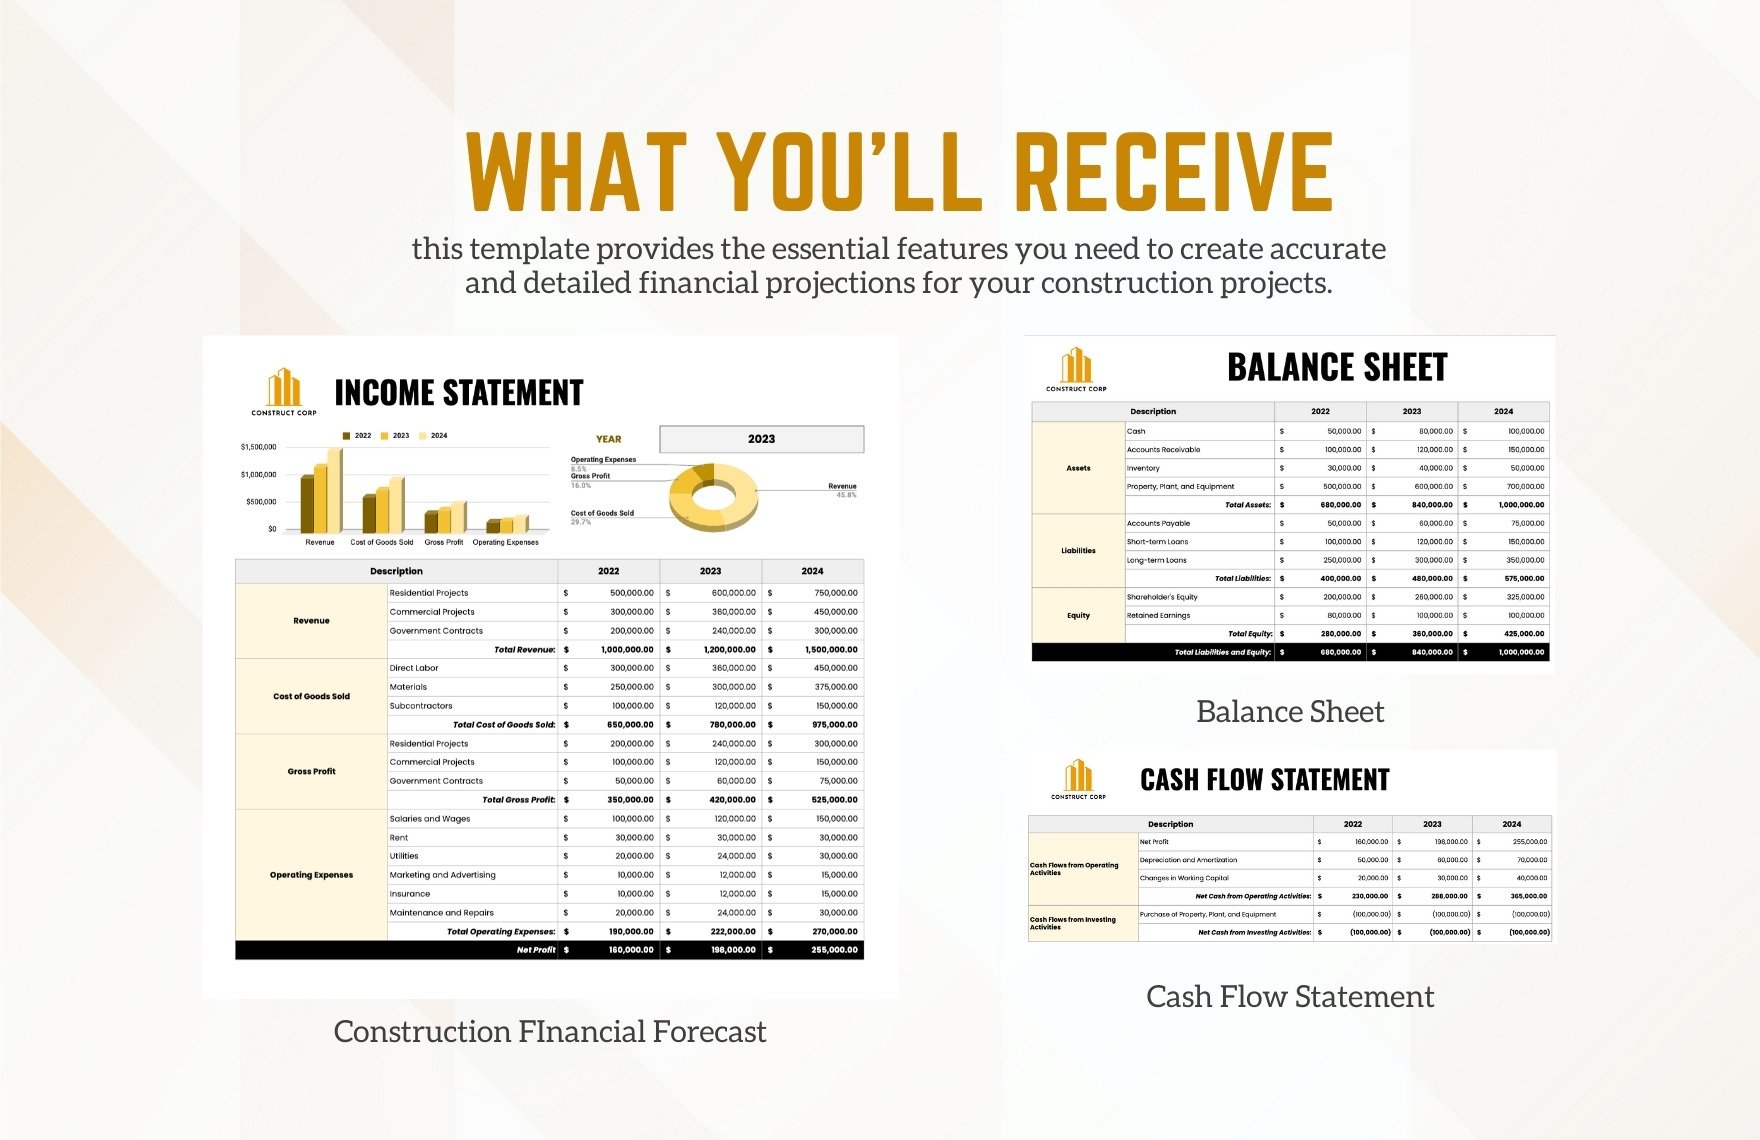 Construction Financial Forecast Template